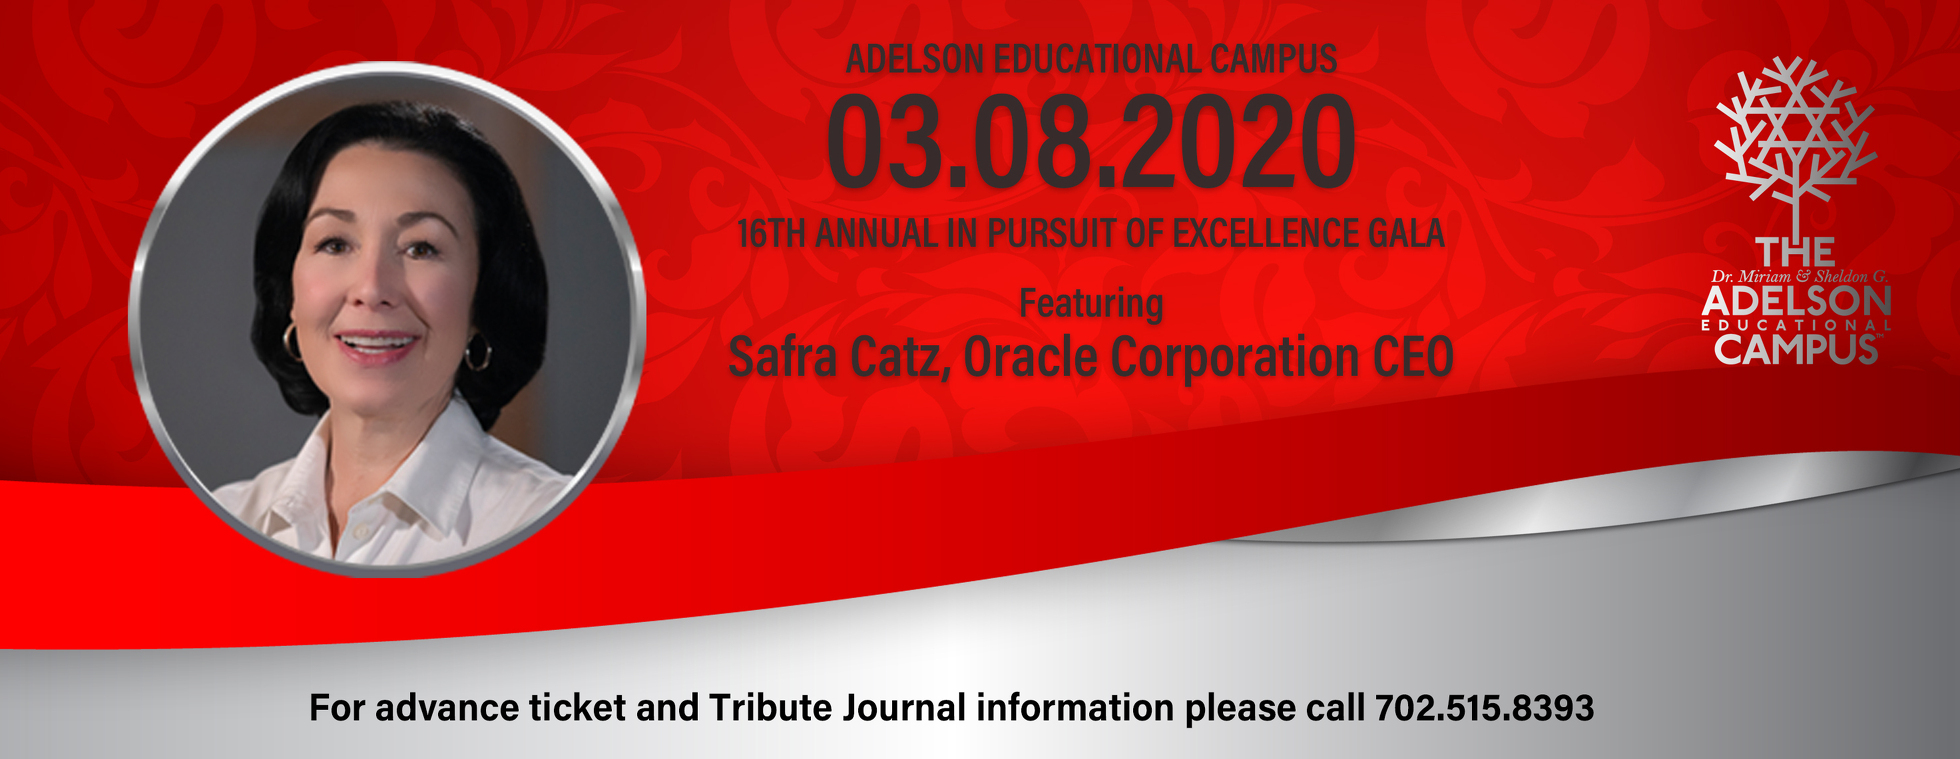 The Adelson Educational Campus 16th Annual In Pursuit of Excellence Gala